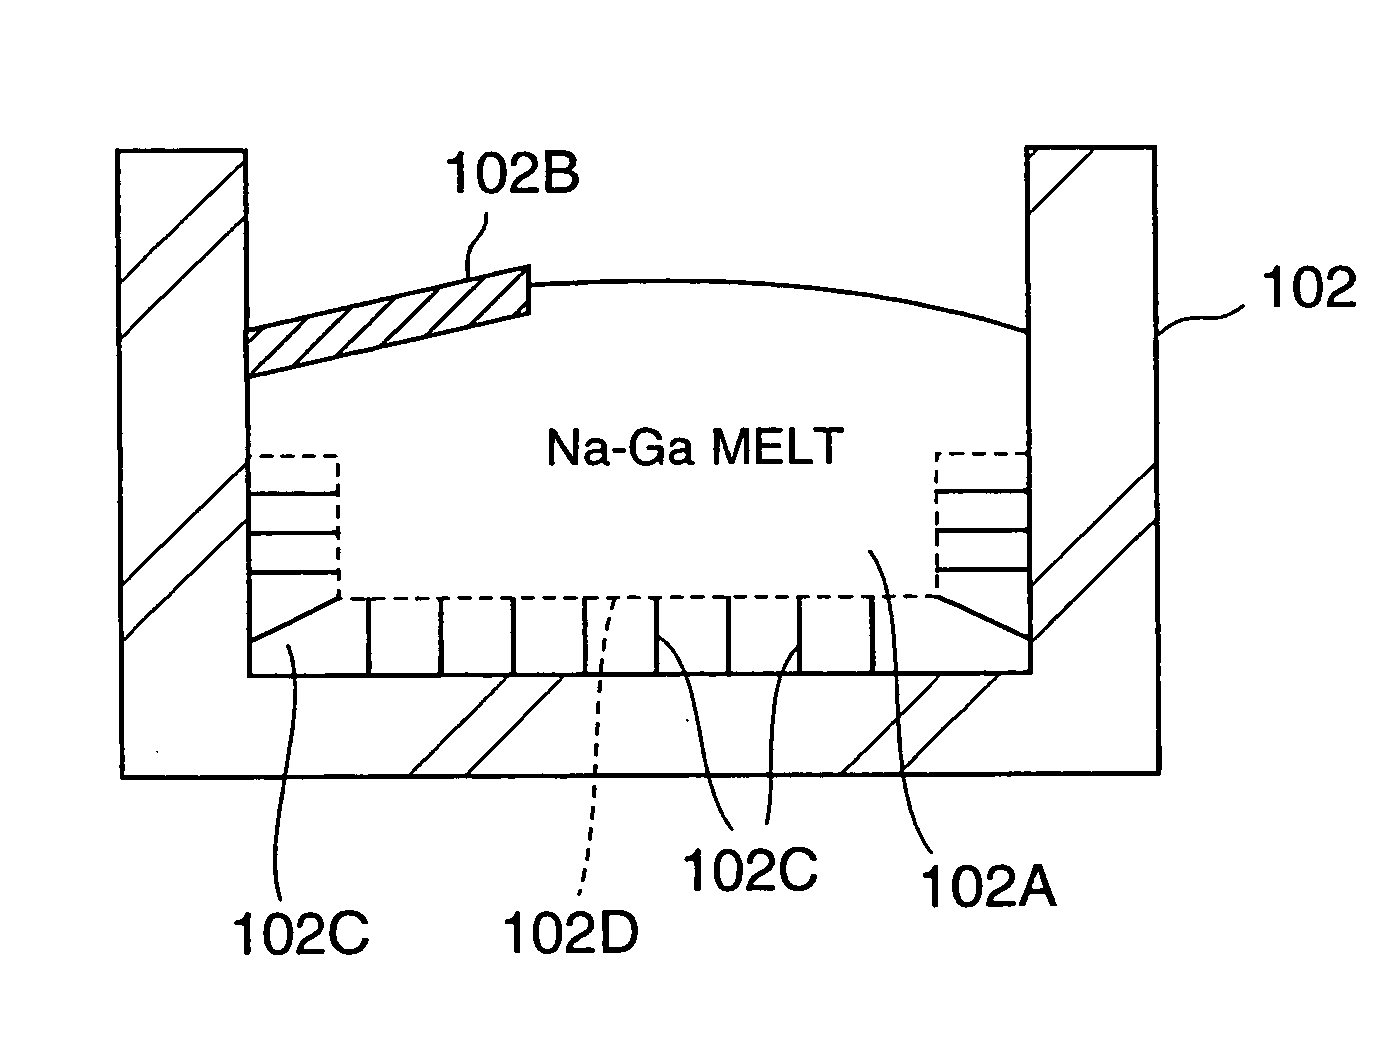 Production of a GaN bulk crystal substrate and a semiconductor device formed thereon